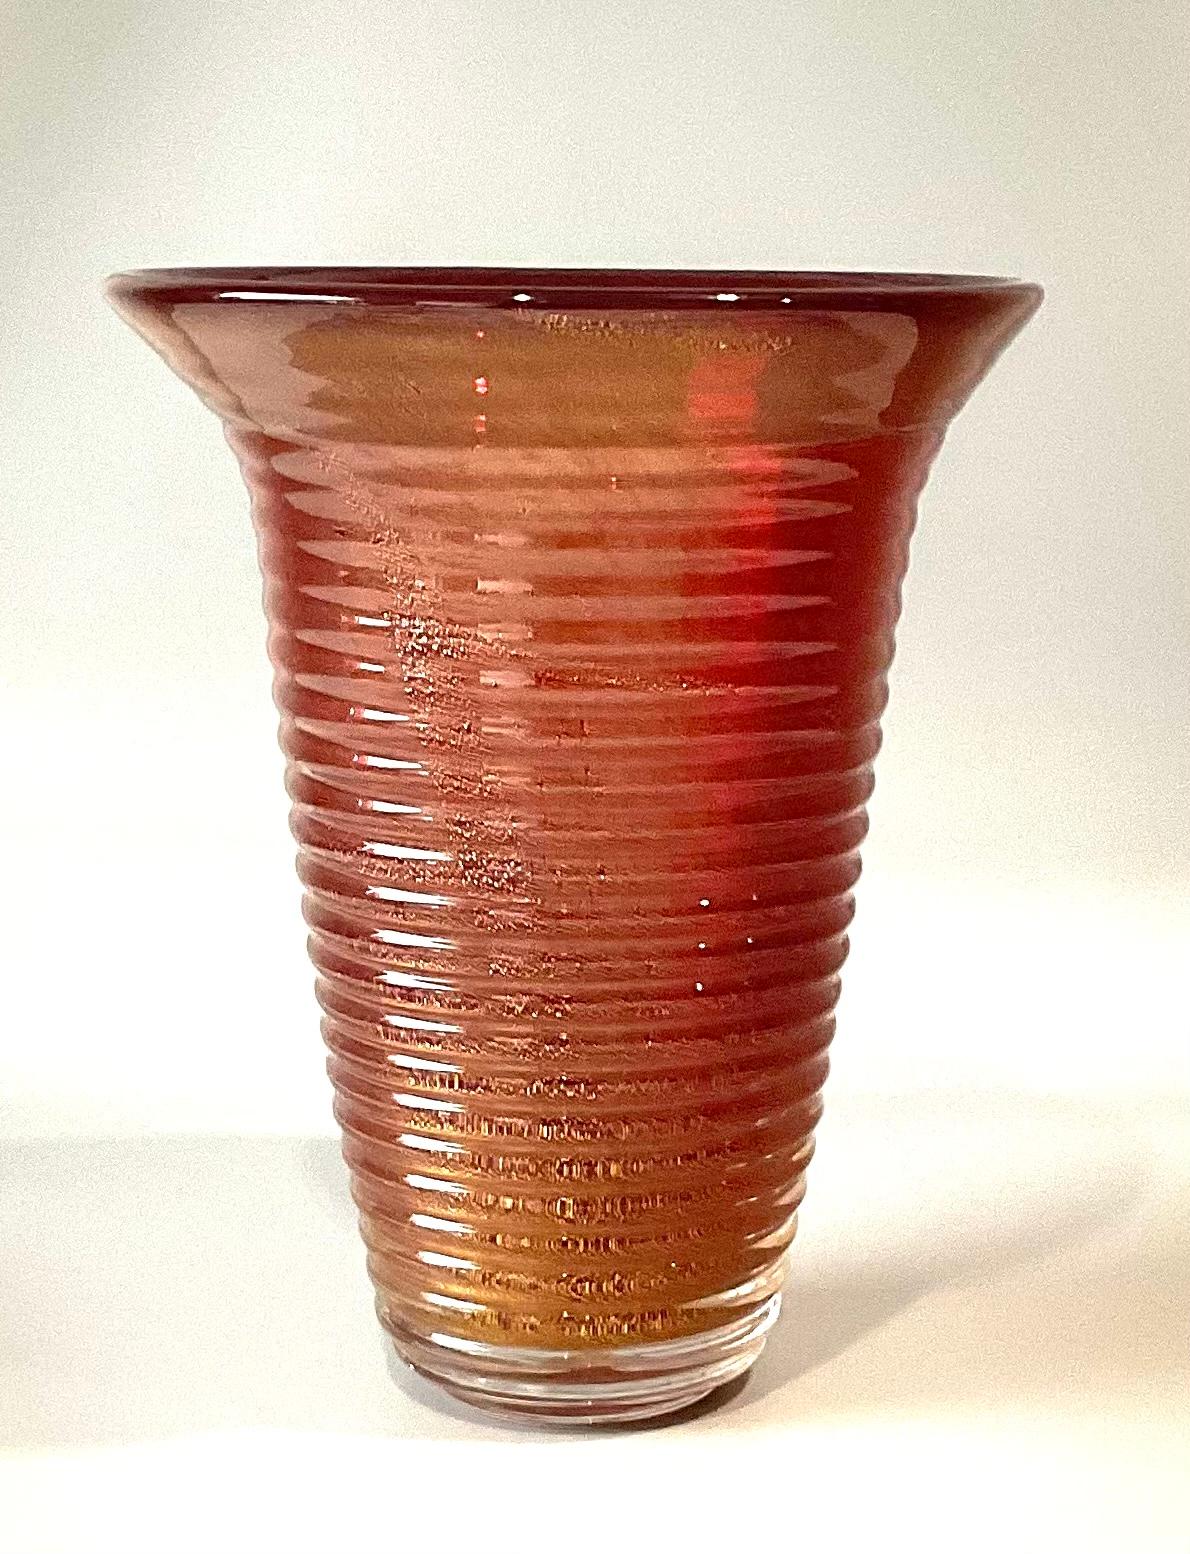 Signed Seguso Vetri D’arte Murano Glass Red Sommerso Vase with Gold Leaf In Good Condition For Sale In Ann Arbor, MI